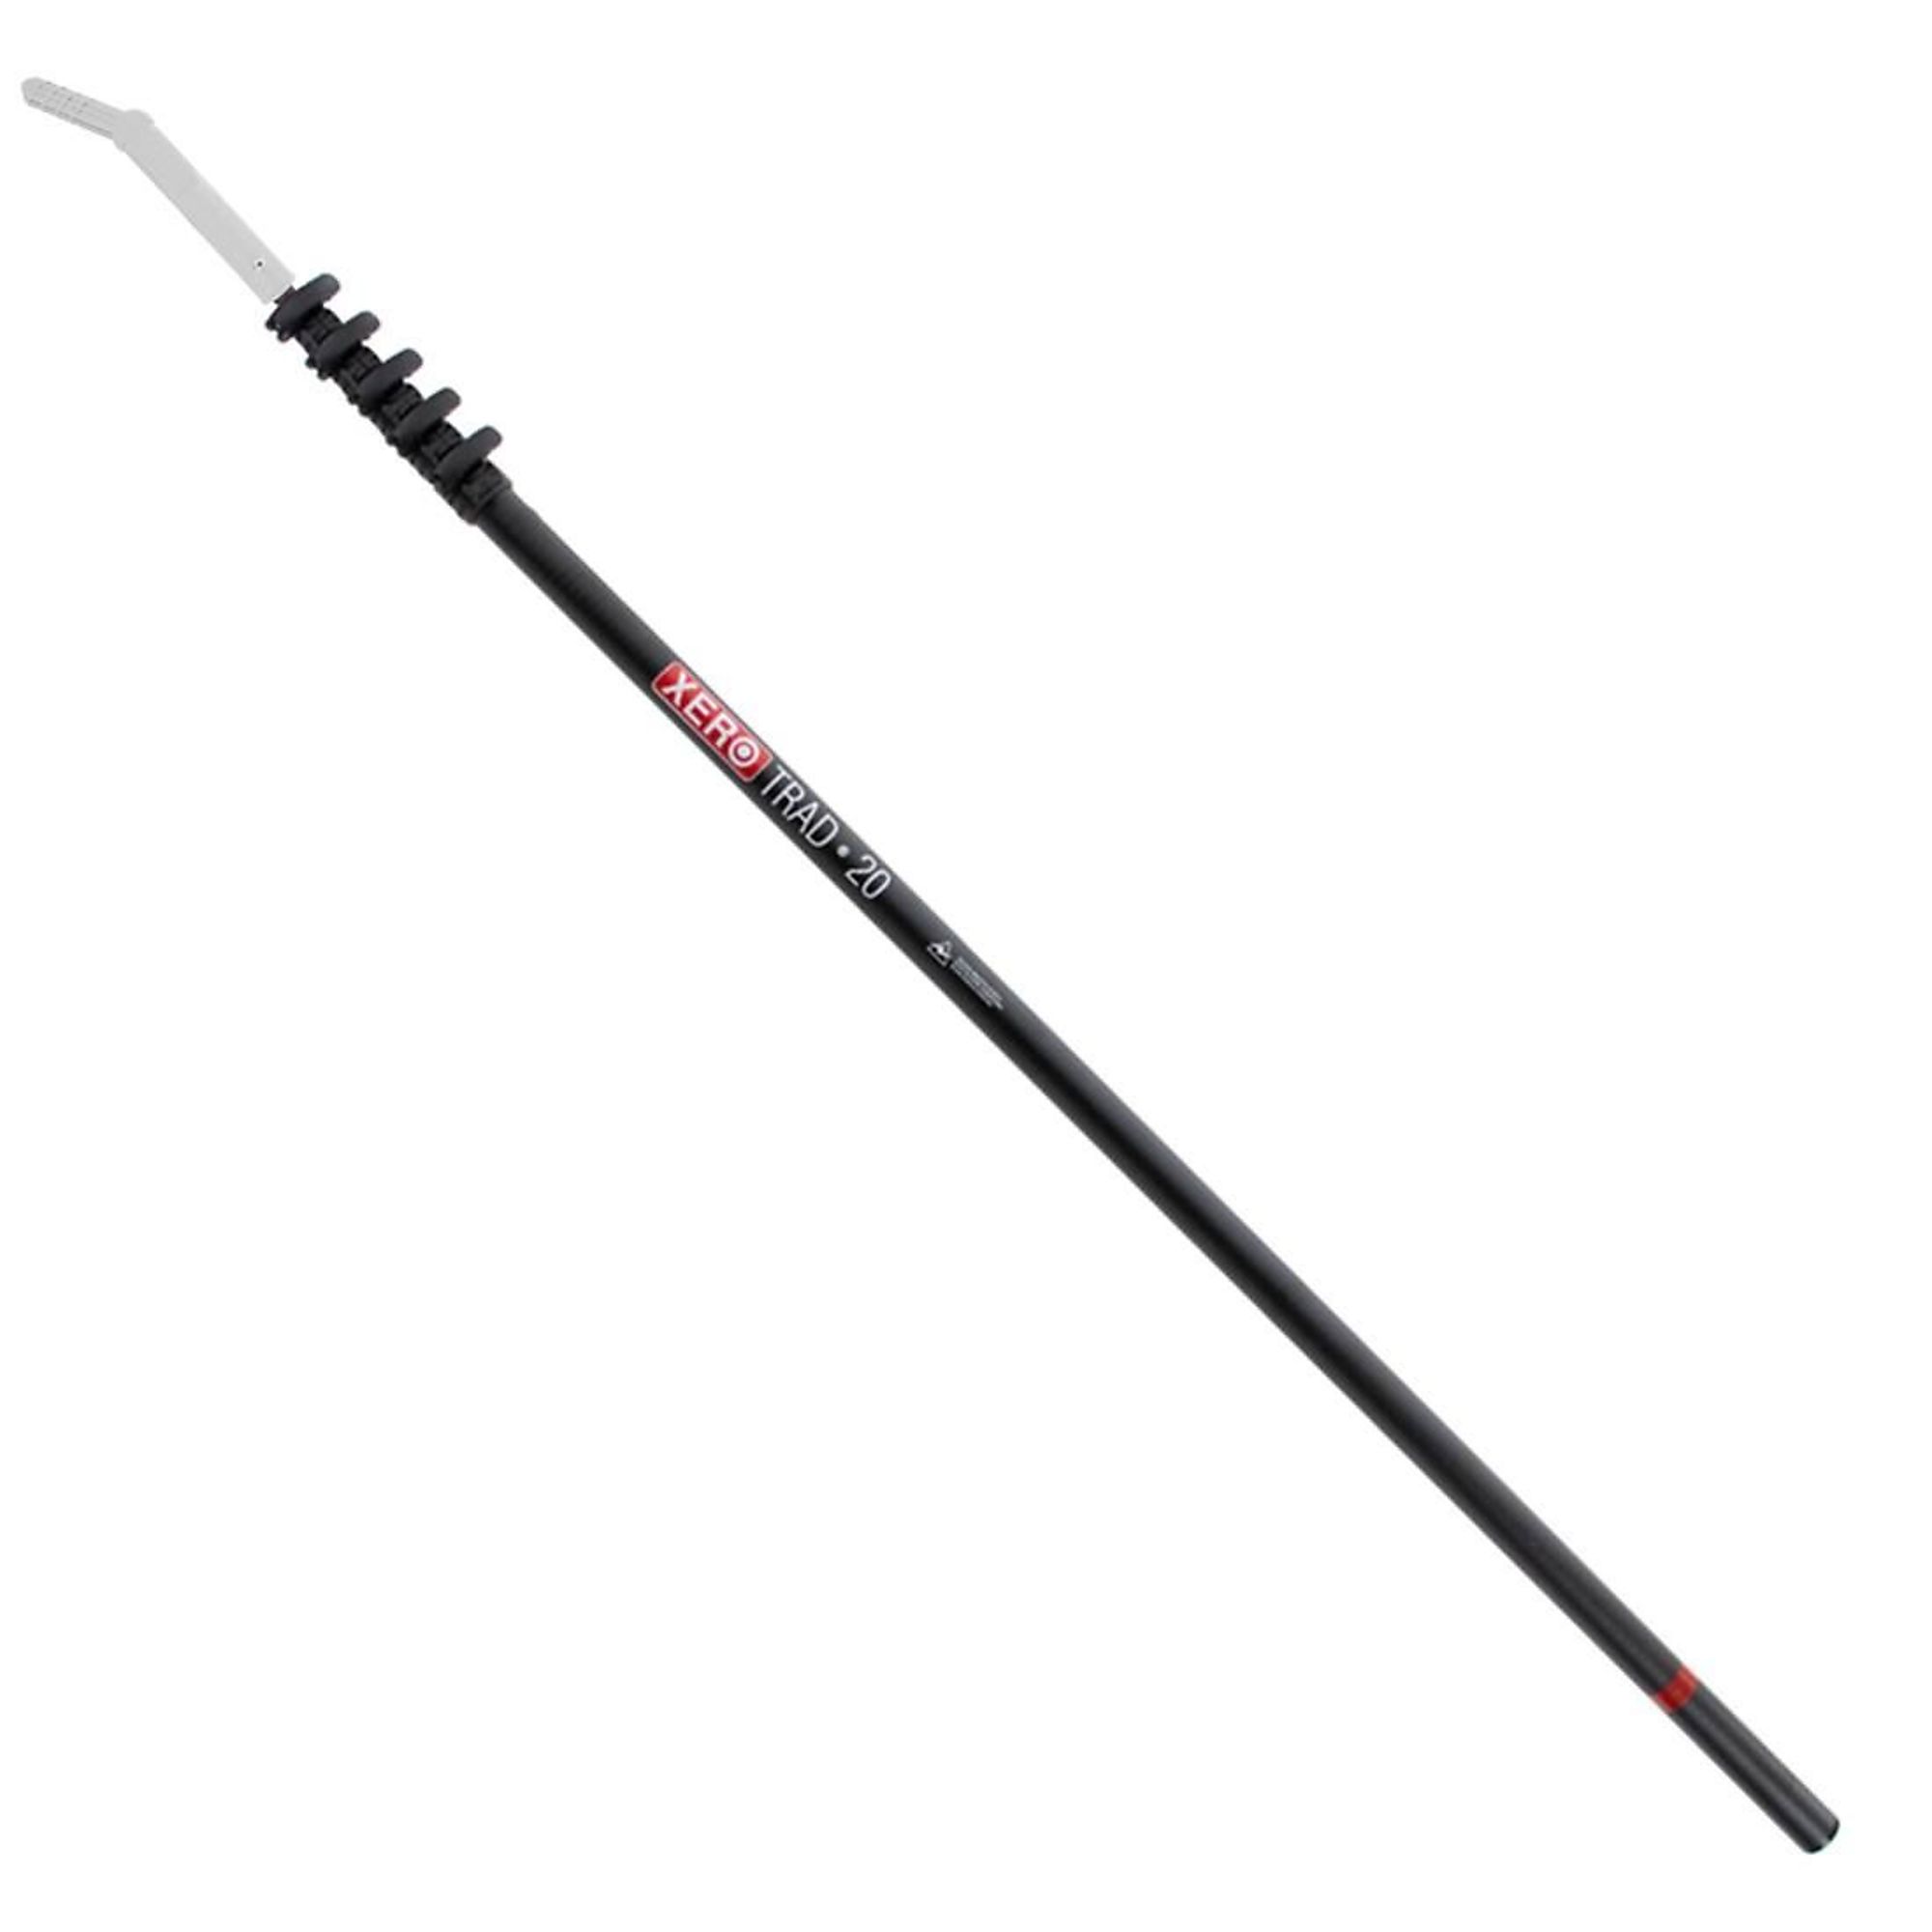 XERO, Trad Pole 2.0 Wagtail Tip - 20ft., Model 209-20-318